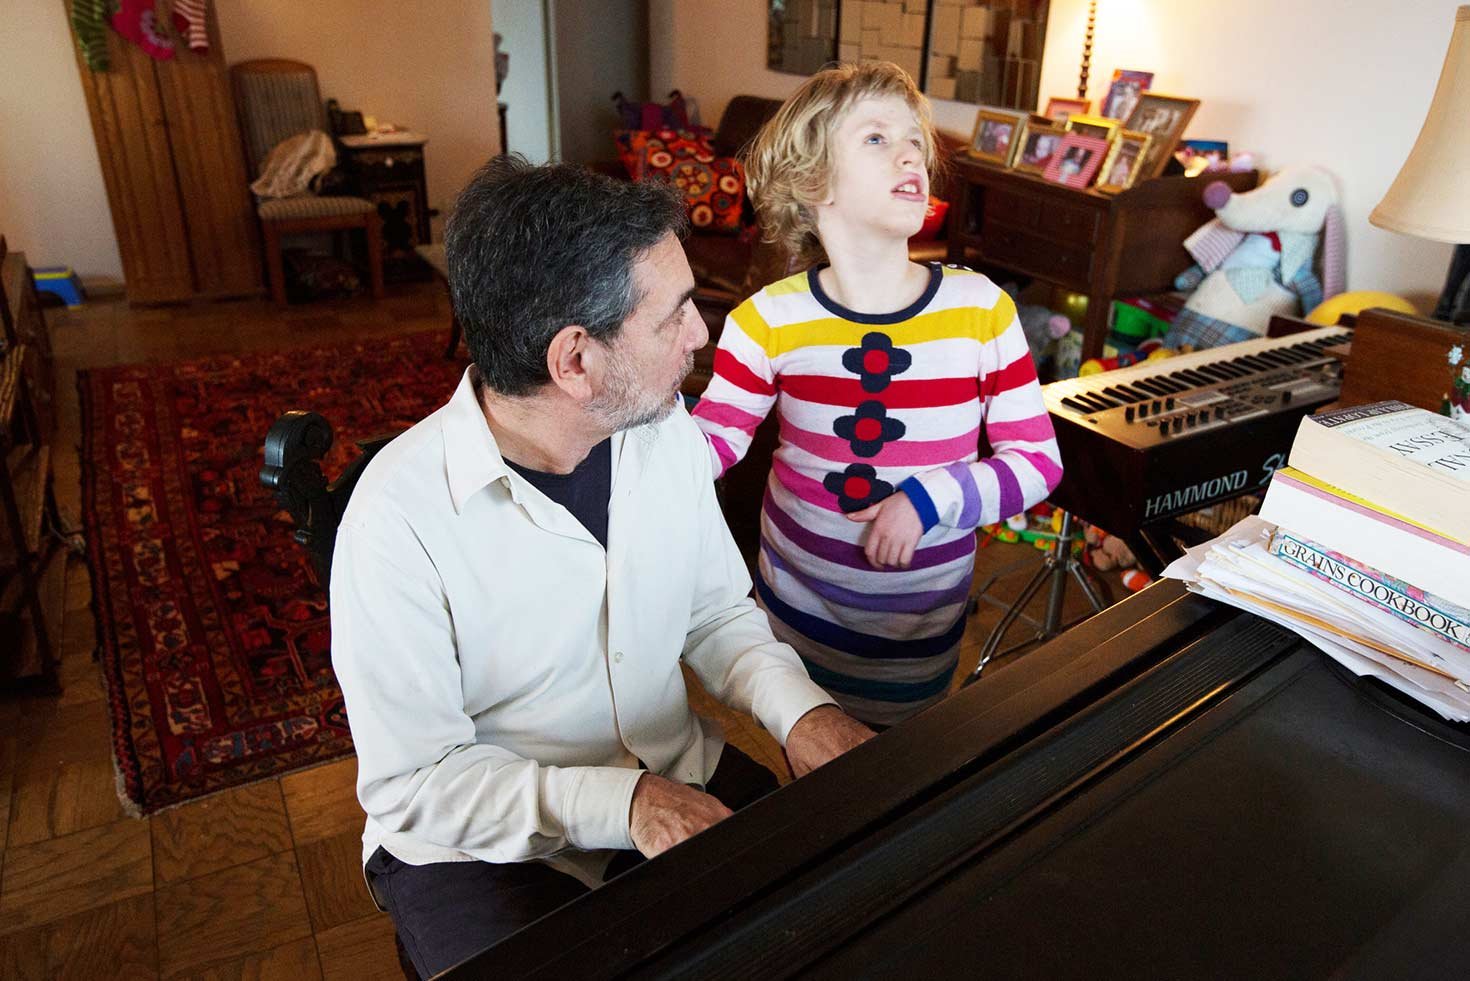 Mike LeDonne, the jazz pianist, and his daughter Mary at their apartment on West 43rd Street.